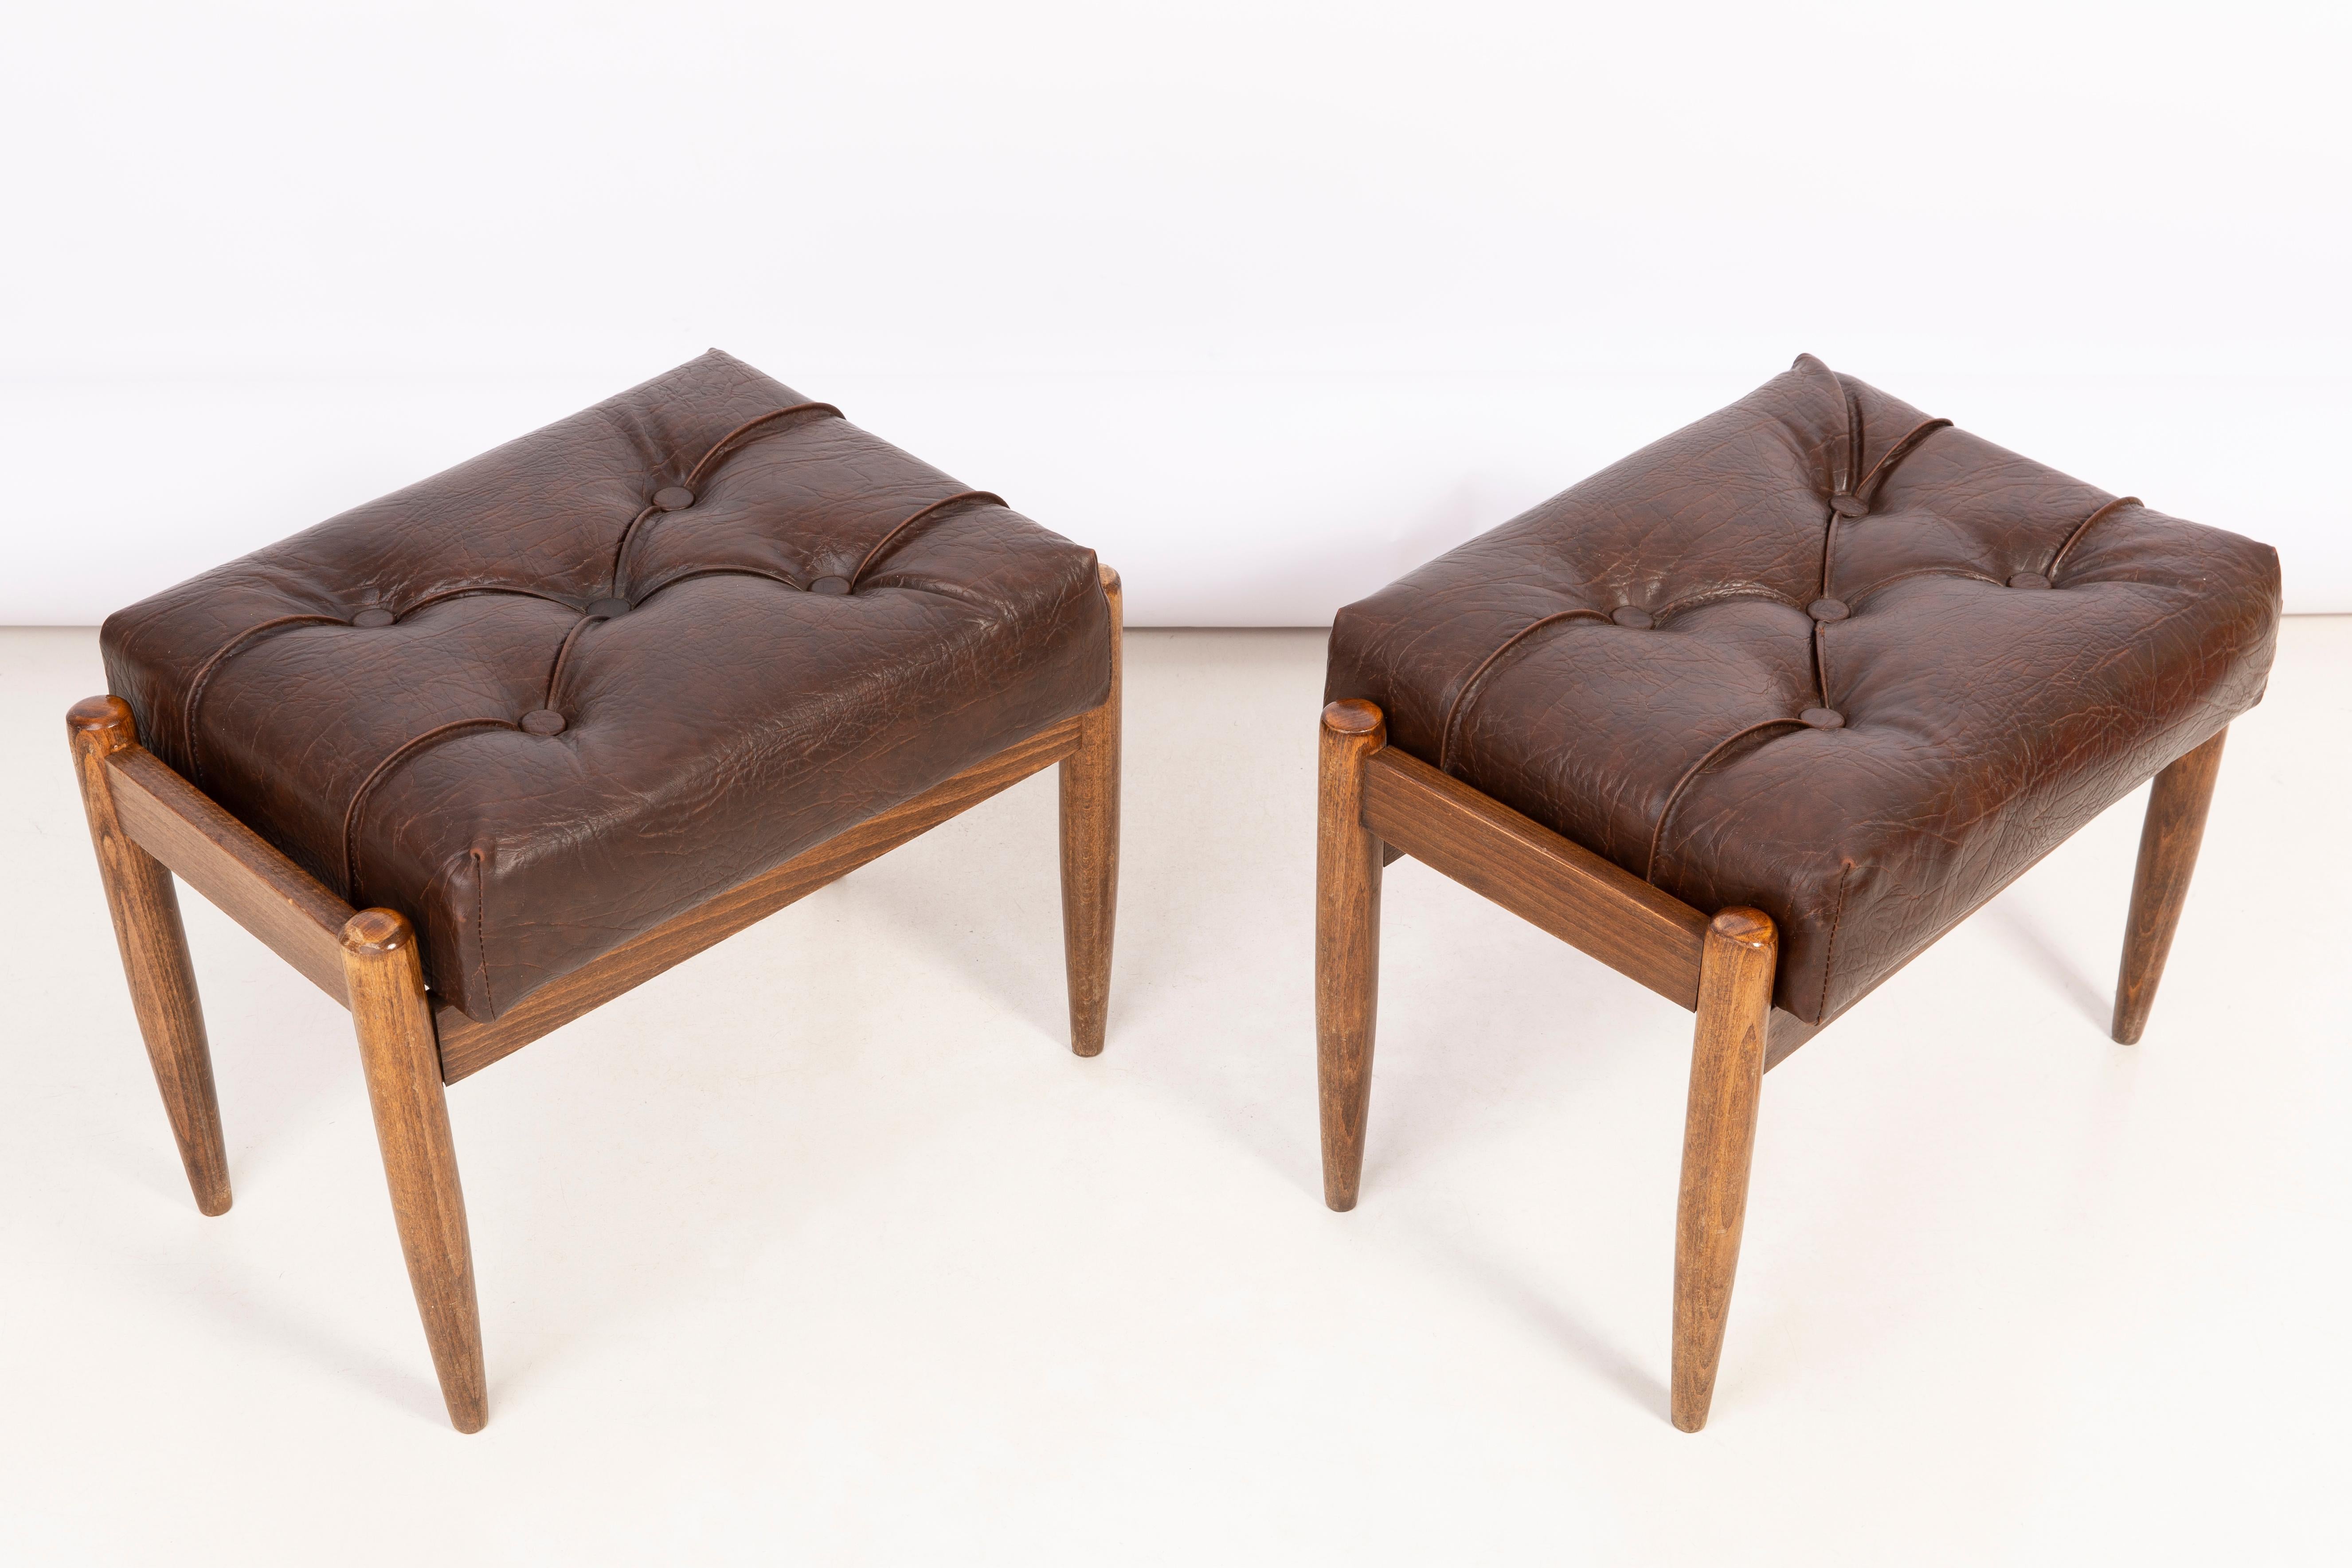 Stools from the turn of the 1960s. Beautiful brown high quality faux leather. The stools consists of an upholstered part, a seat and wooden legs narrowing downwards, characteristic of the 1960s style. They are in good original vintage condition -